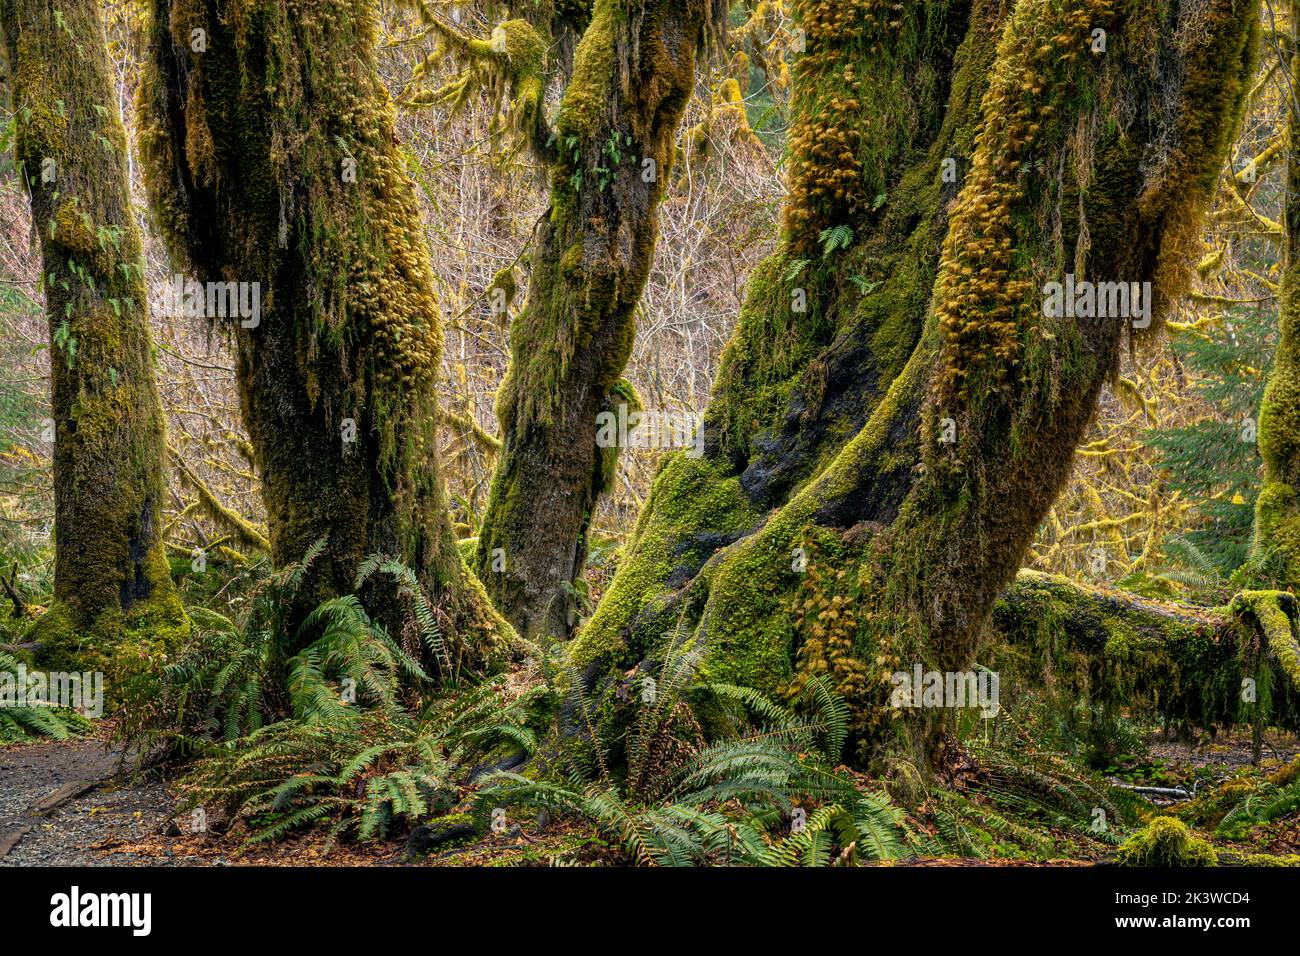 WA22106-00...WASHINGTON - Moss covered Big Leaf Maple trees and an understory of Western Sword Ferns viewed in the Hall of Mosses, Olympic National Pa Stock Photo